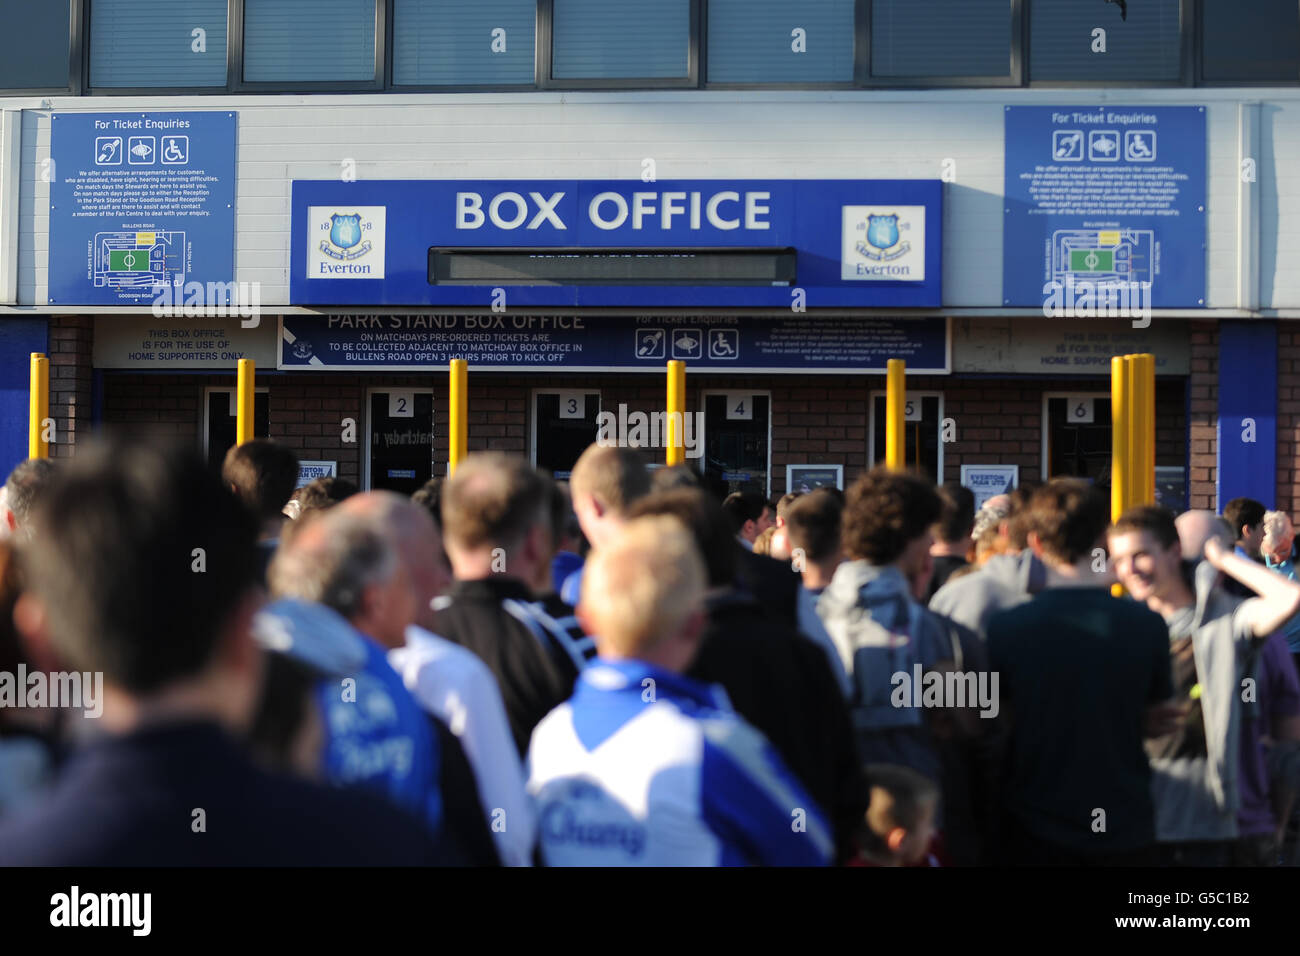 Box Office At Goodison High Resolution Stock Photography and Images - Alamy